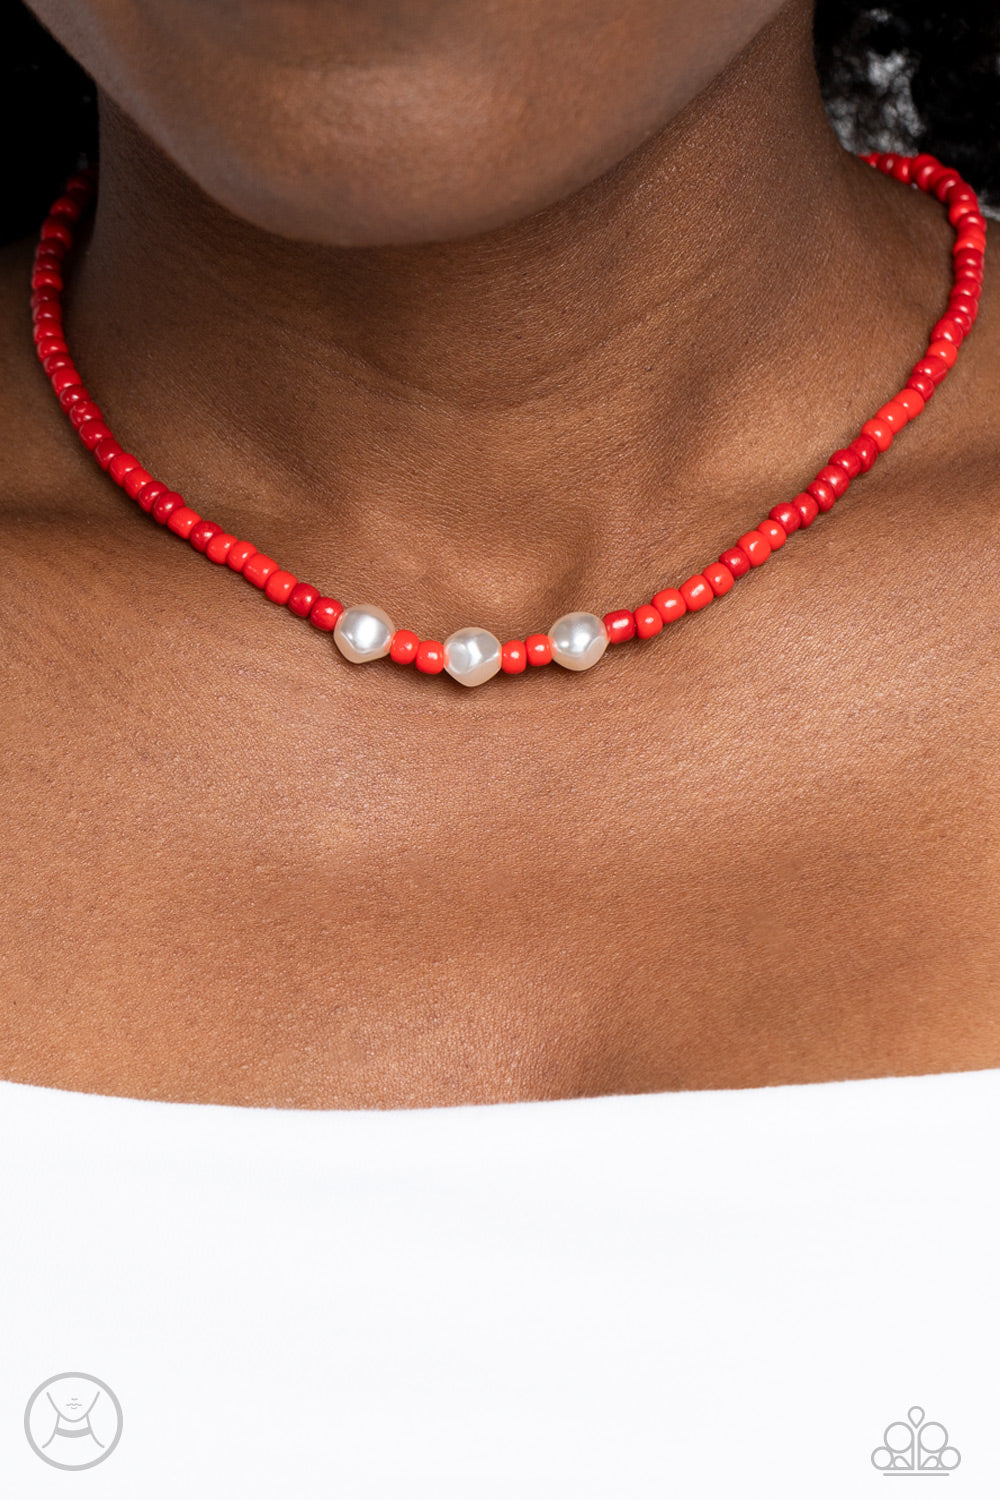 I Can SEED Clearly Now - Red Seed Bead & White Pearl Paparazzi Choker Necklace & matching earrings